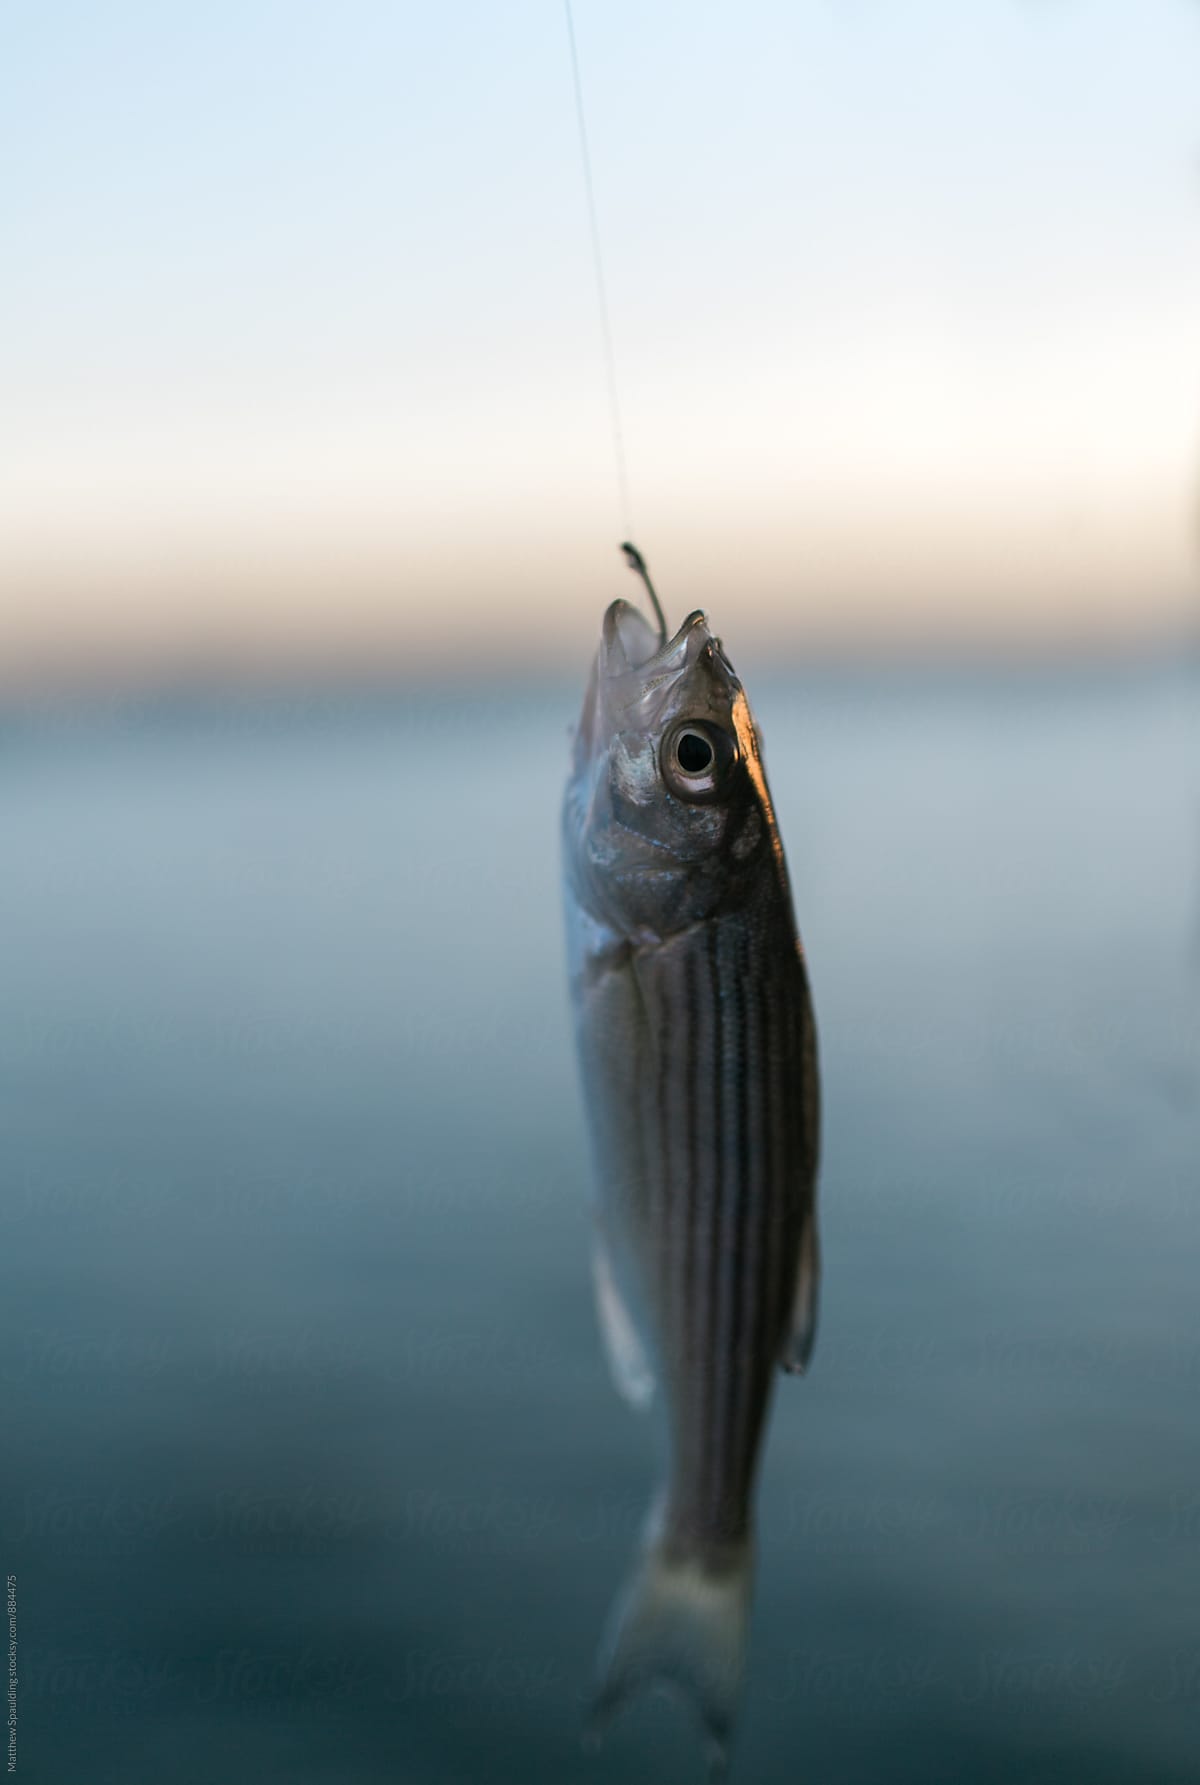 Small Striped Bass Fish On Fishing Hook by Stocksy Contributor